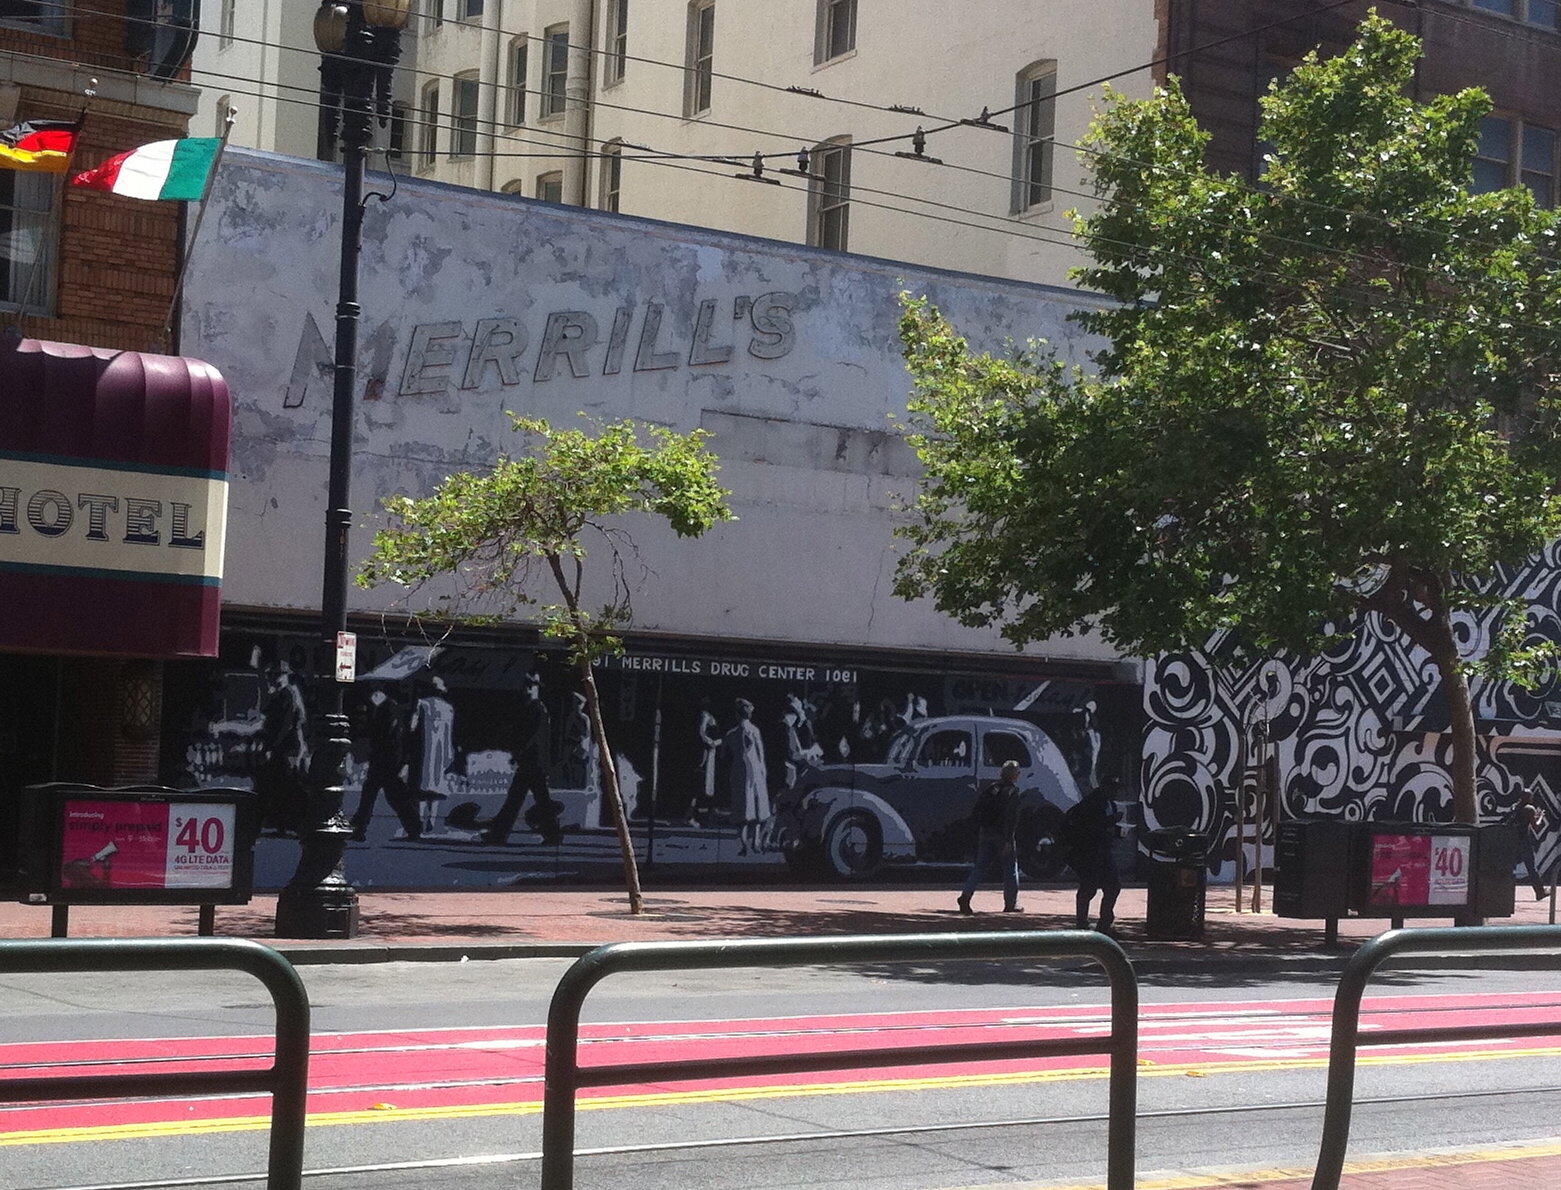 The mural in its original location on Market Street